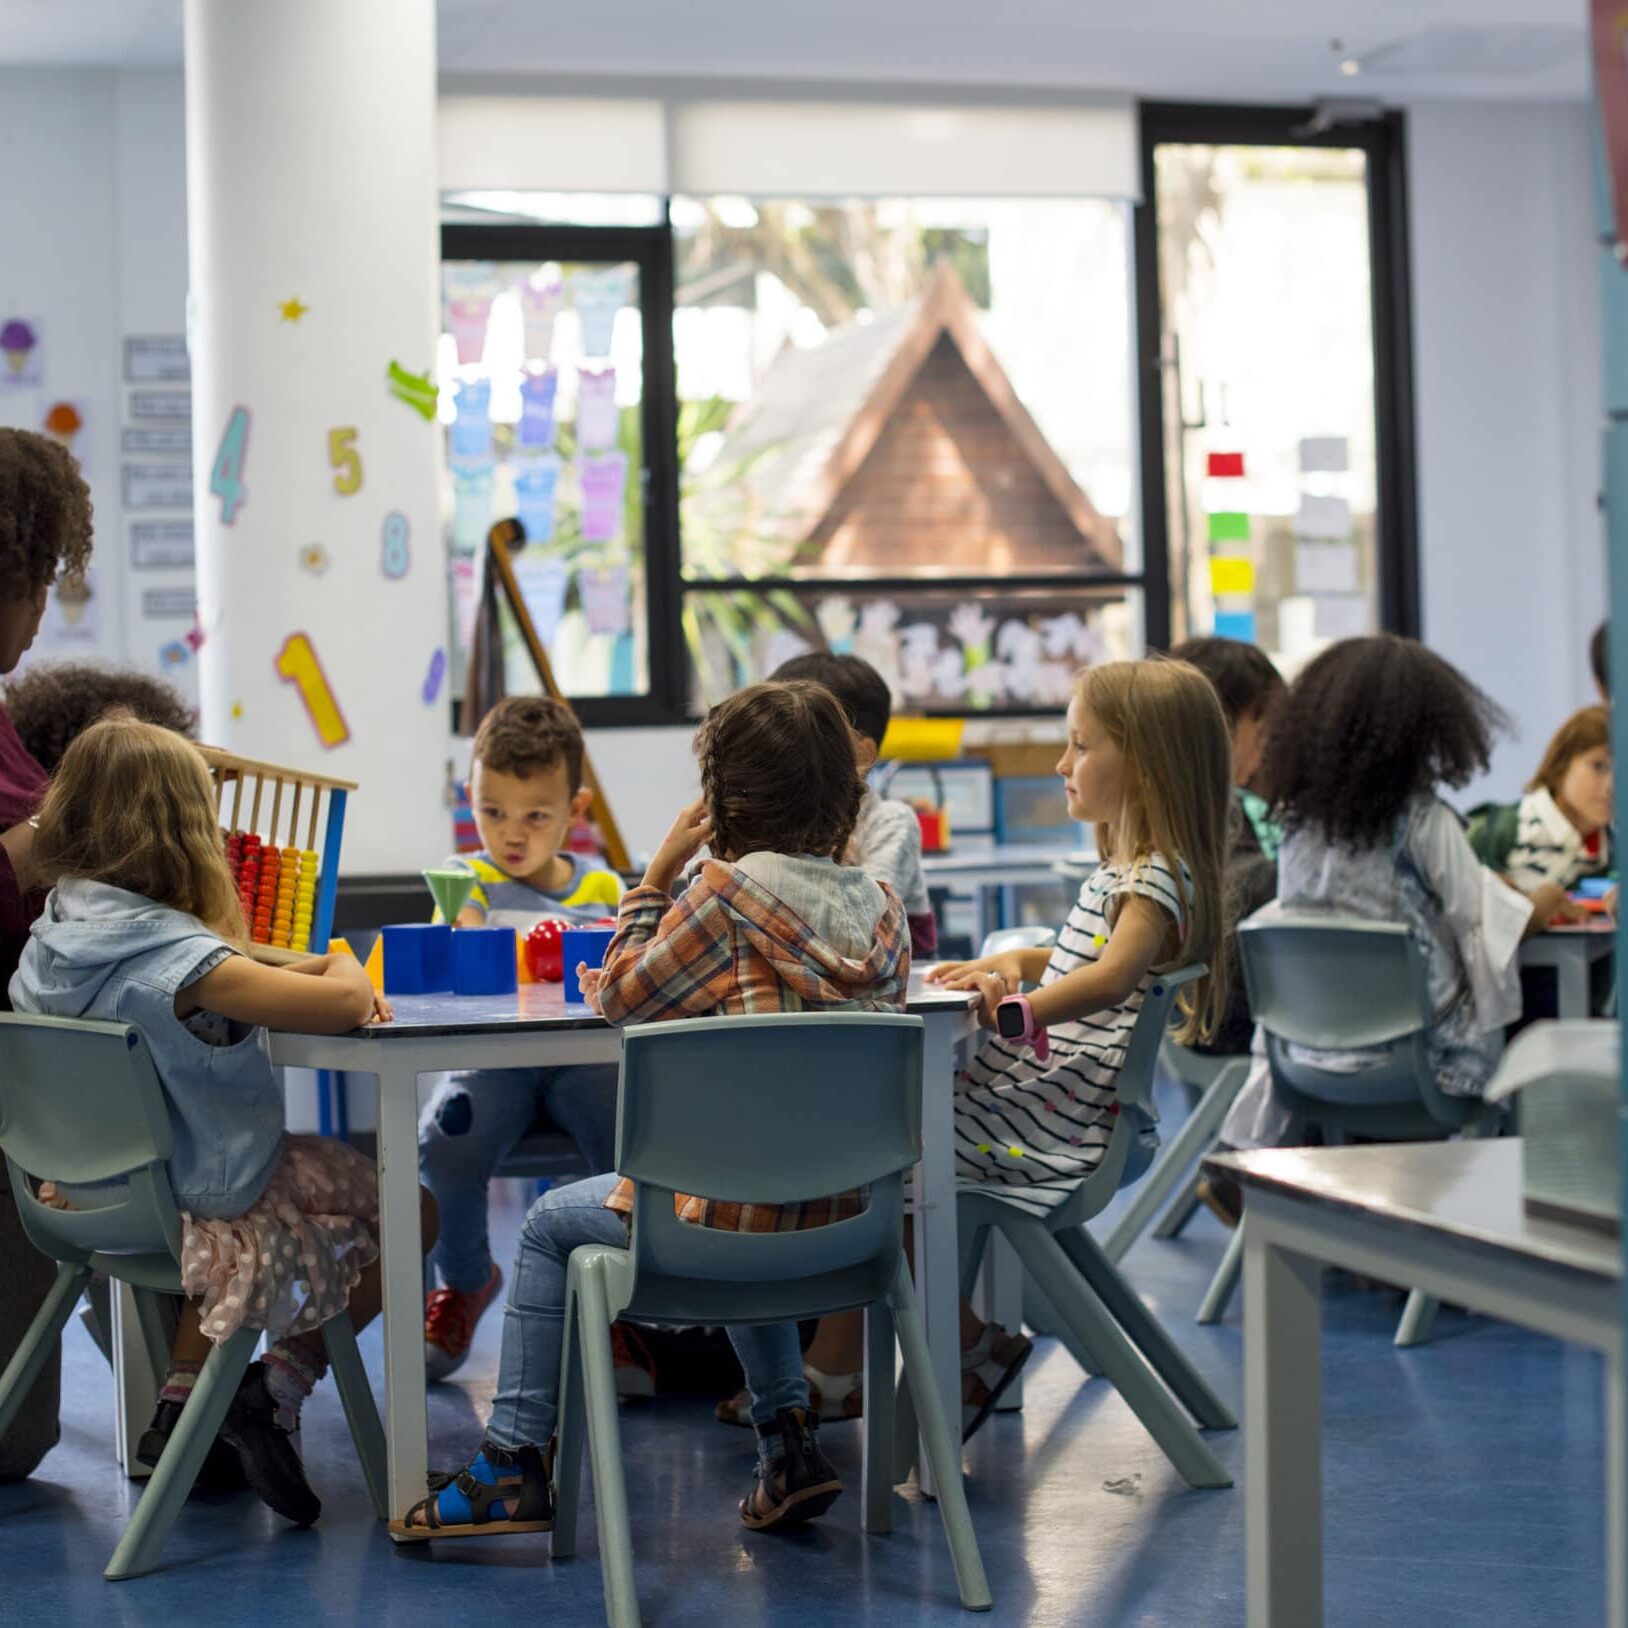 Group Of Diverse Students At Daycare